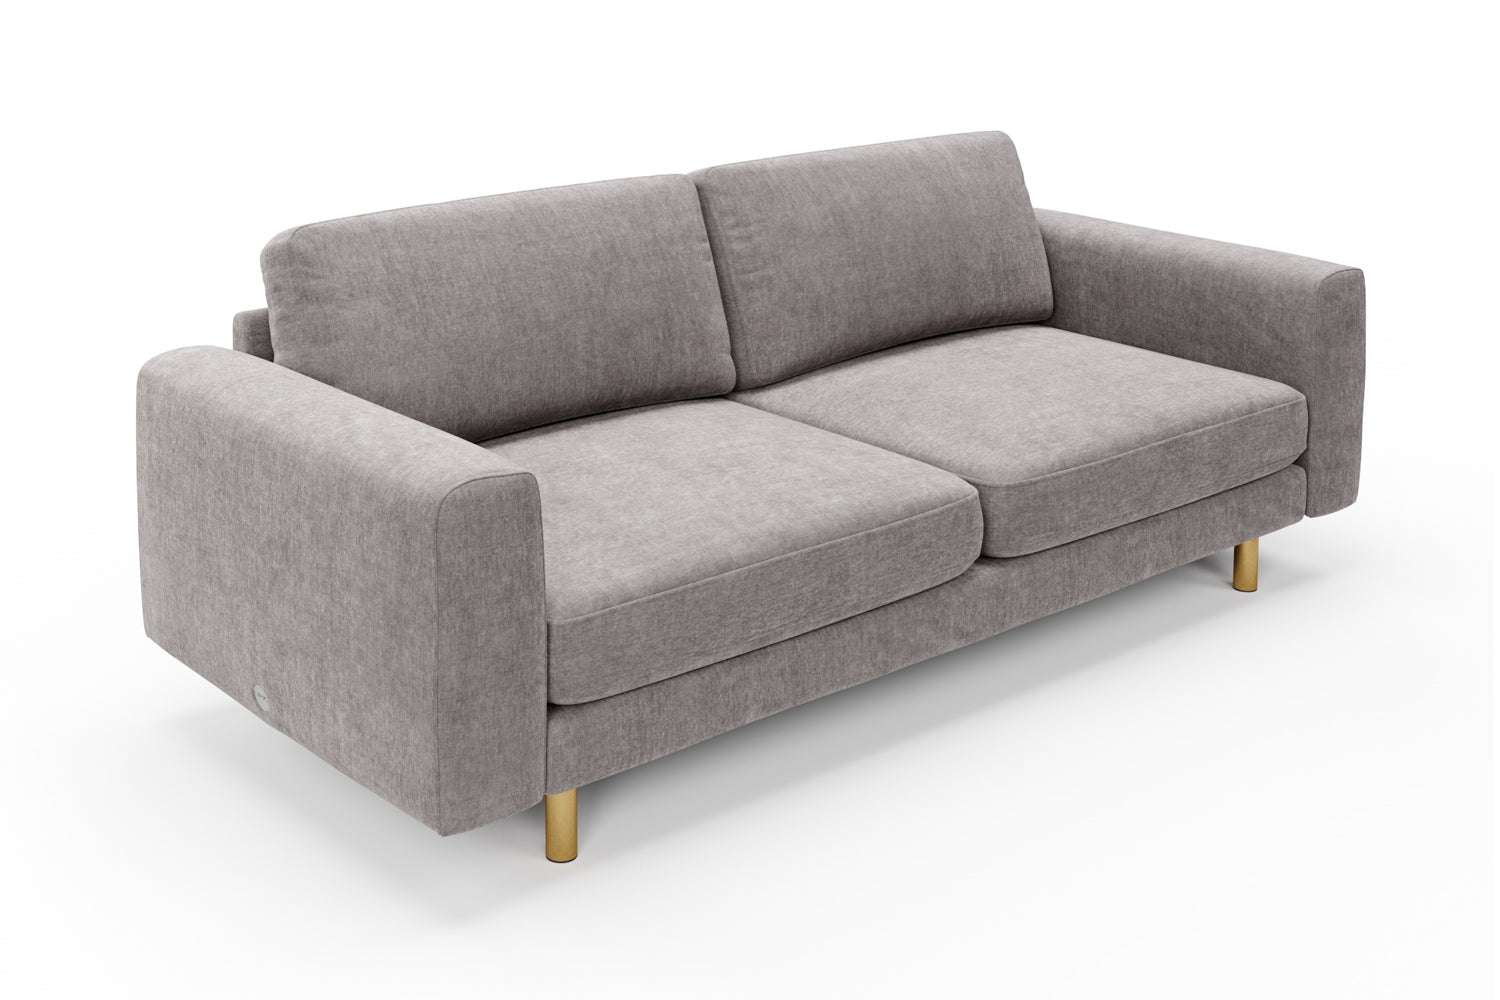 SNUG | The Big Chill 3 Seater Sofa in Mid Grey